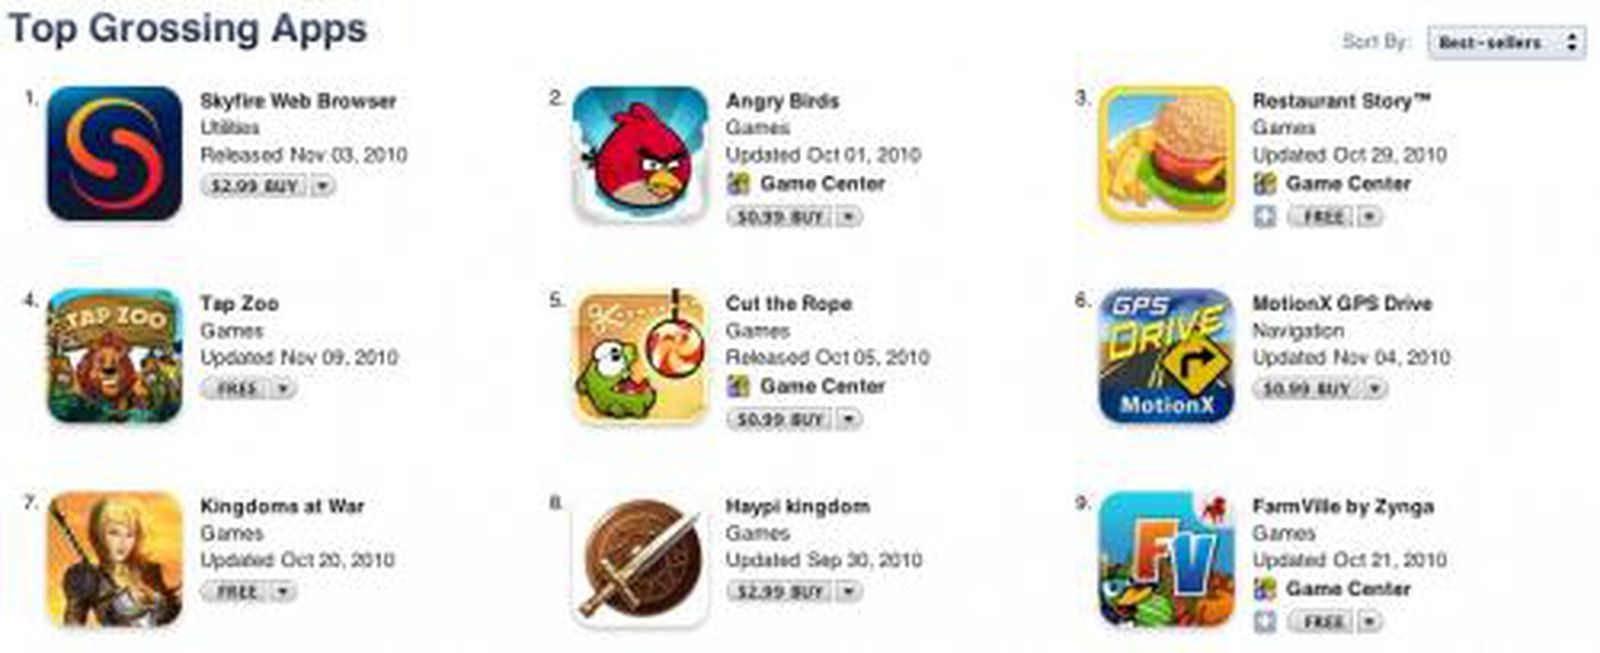 68 of the 100 top grossing UK Android apps are freemium games, Technology